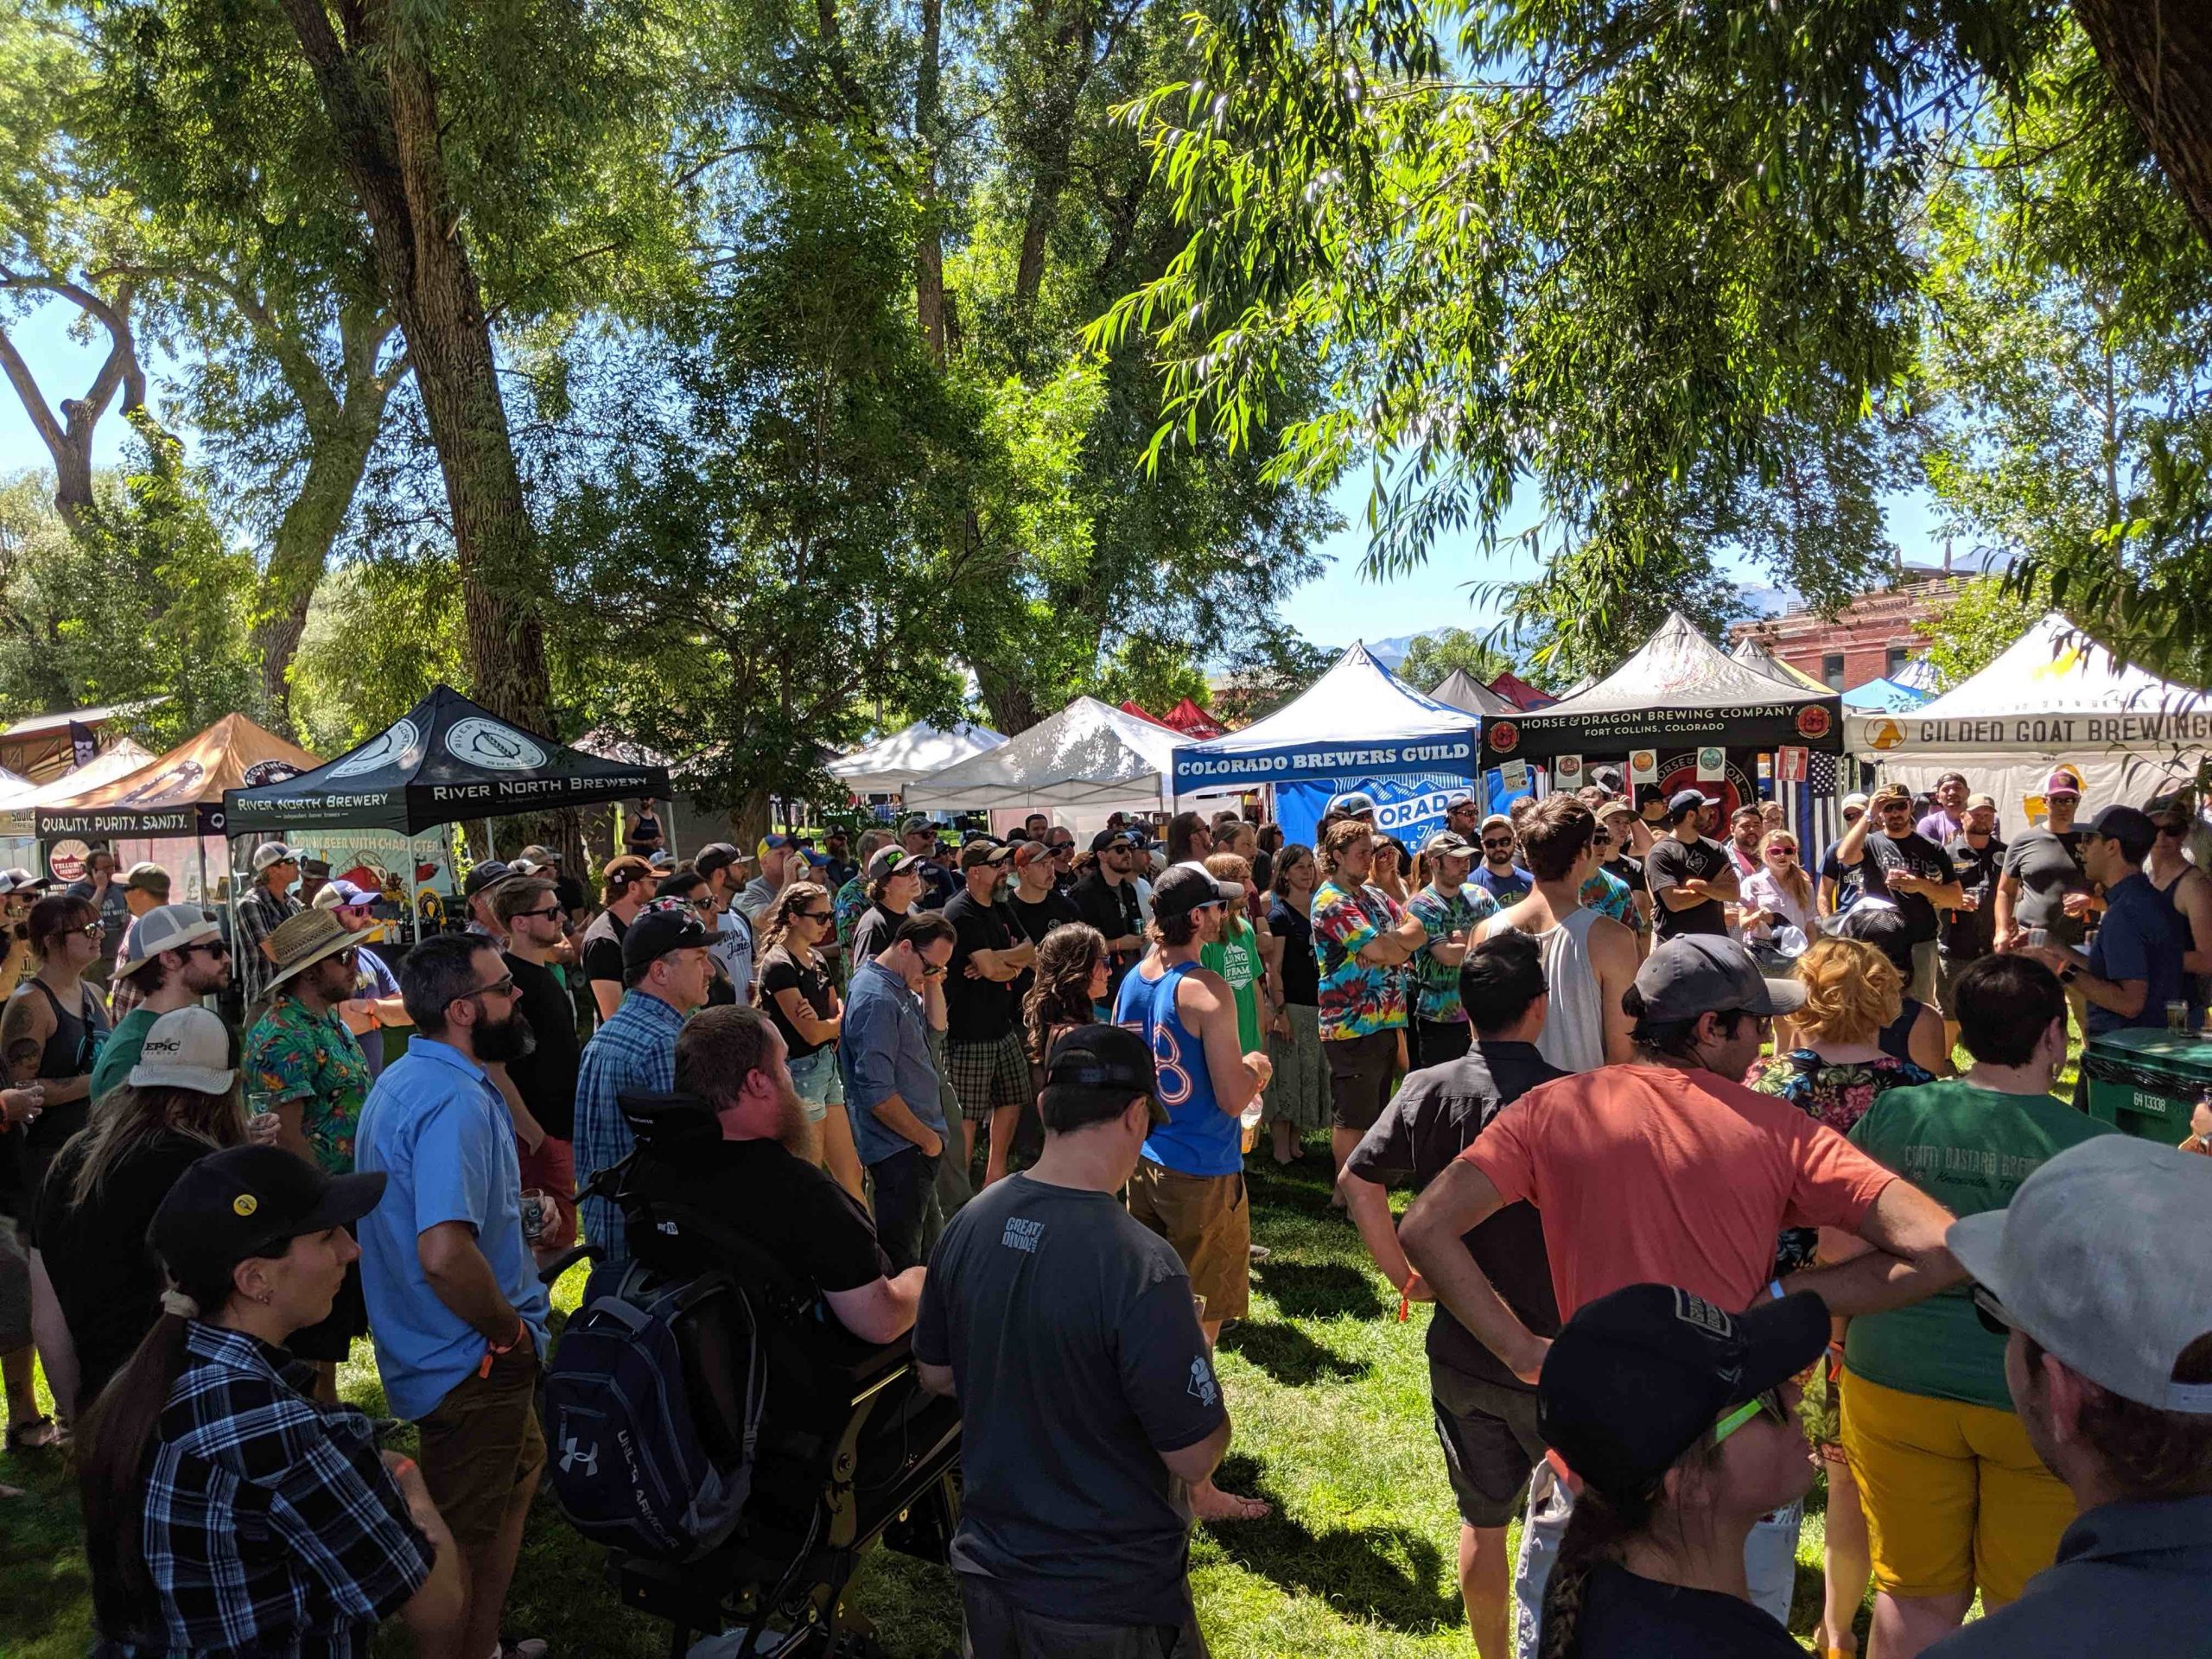 The 24th Annual Colorado Brewers Rendezvous in Salida Postponed